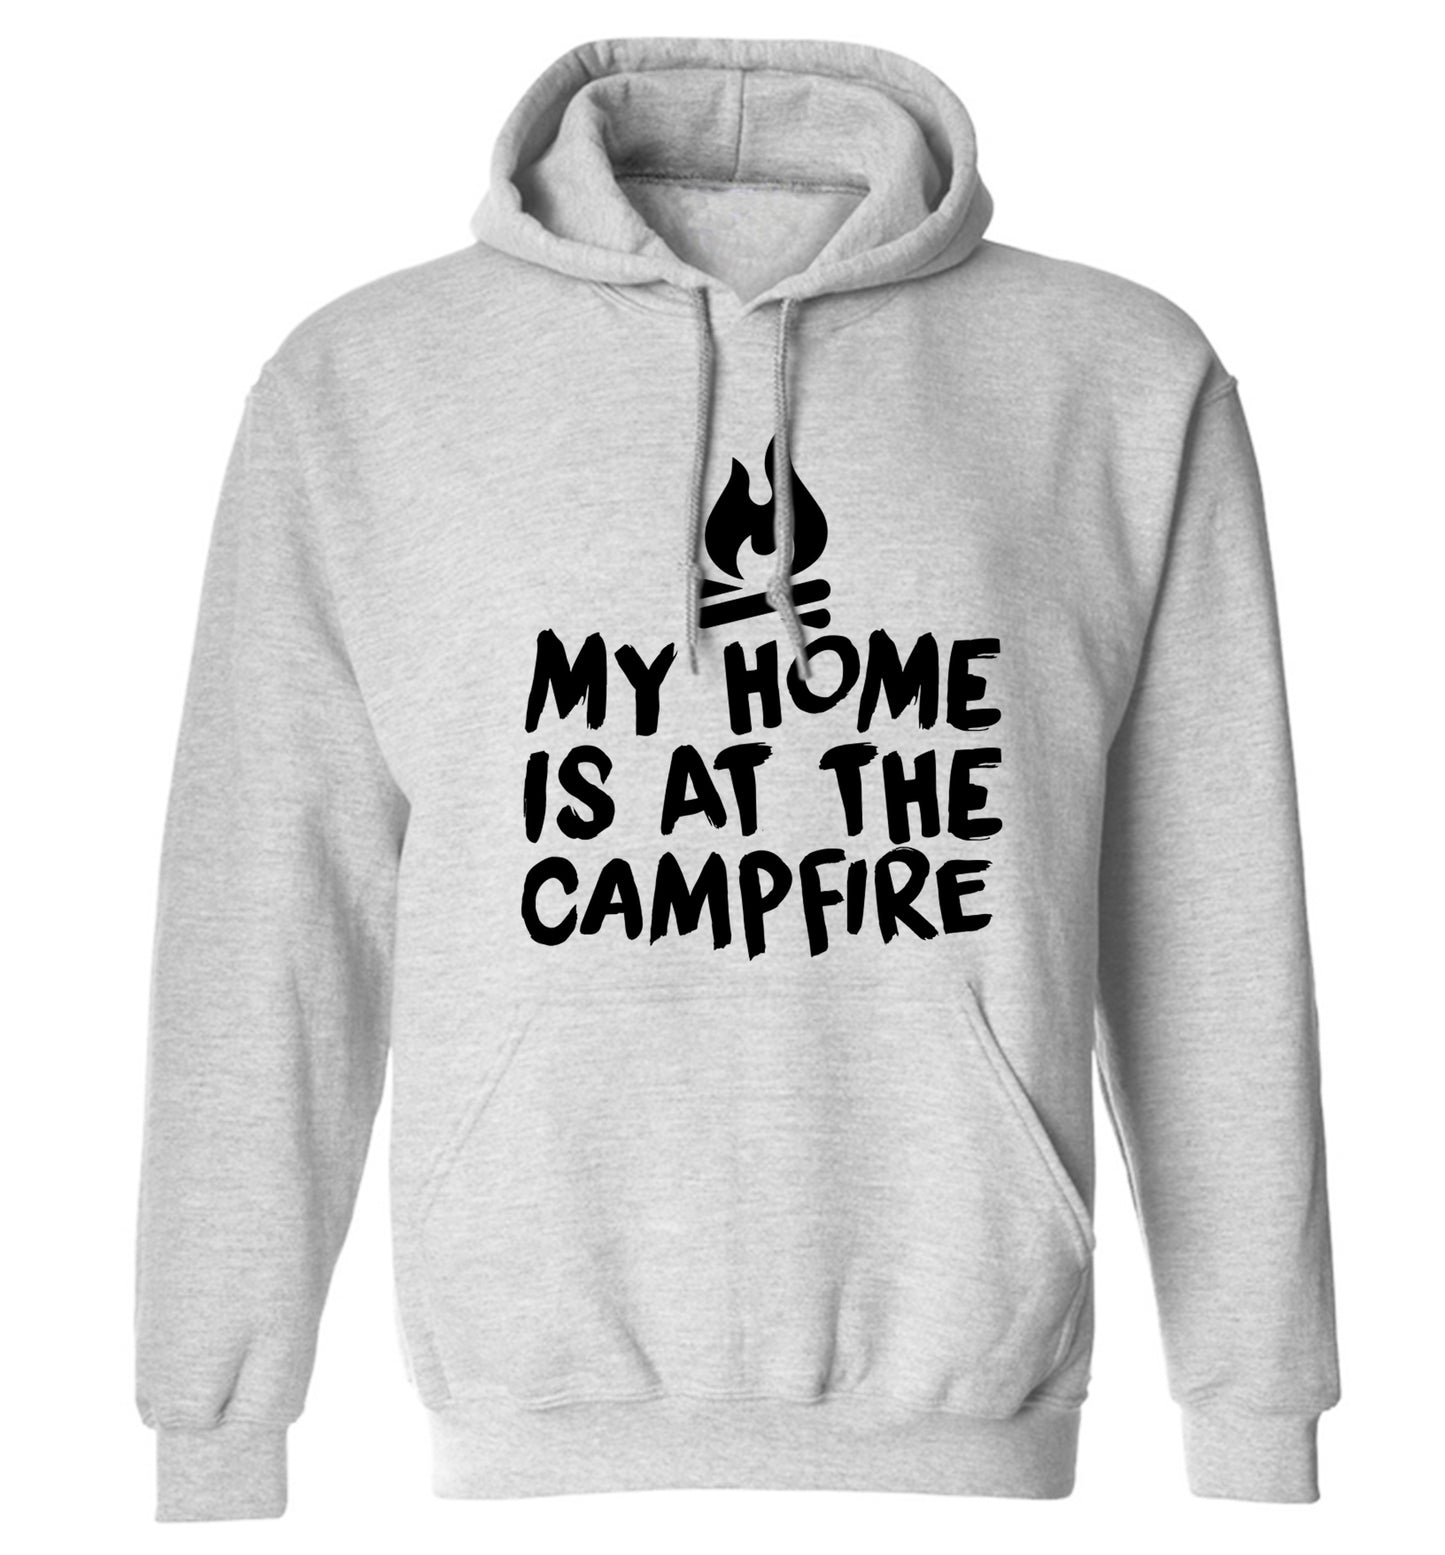 My home is at the campfire adults unisex grey hoodie 2XL